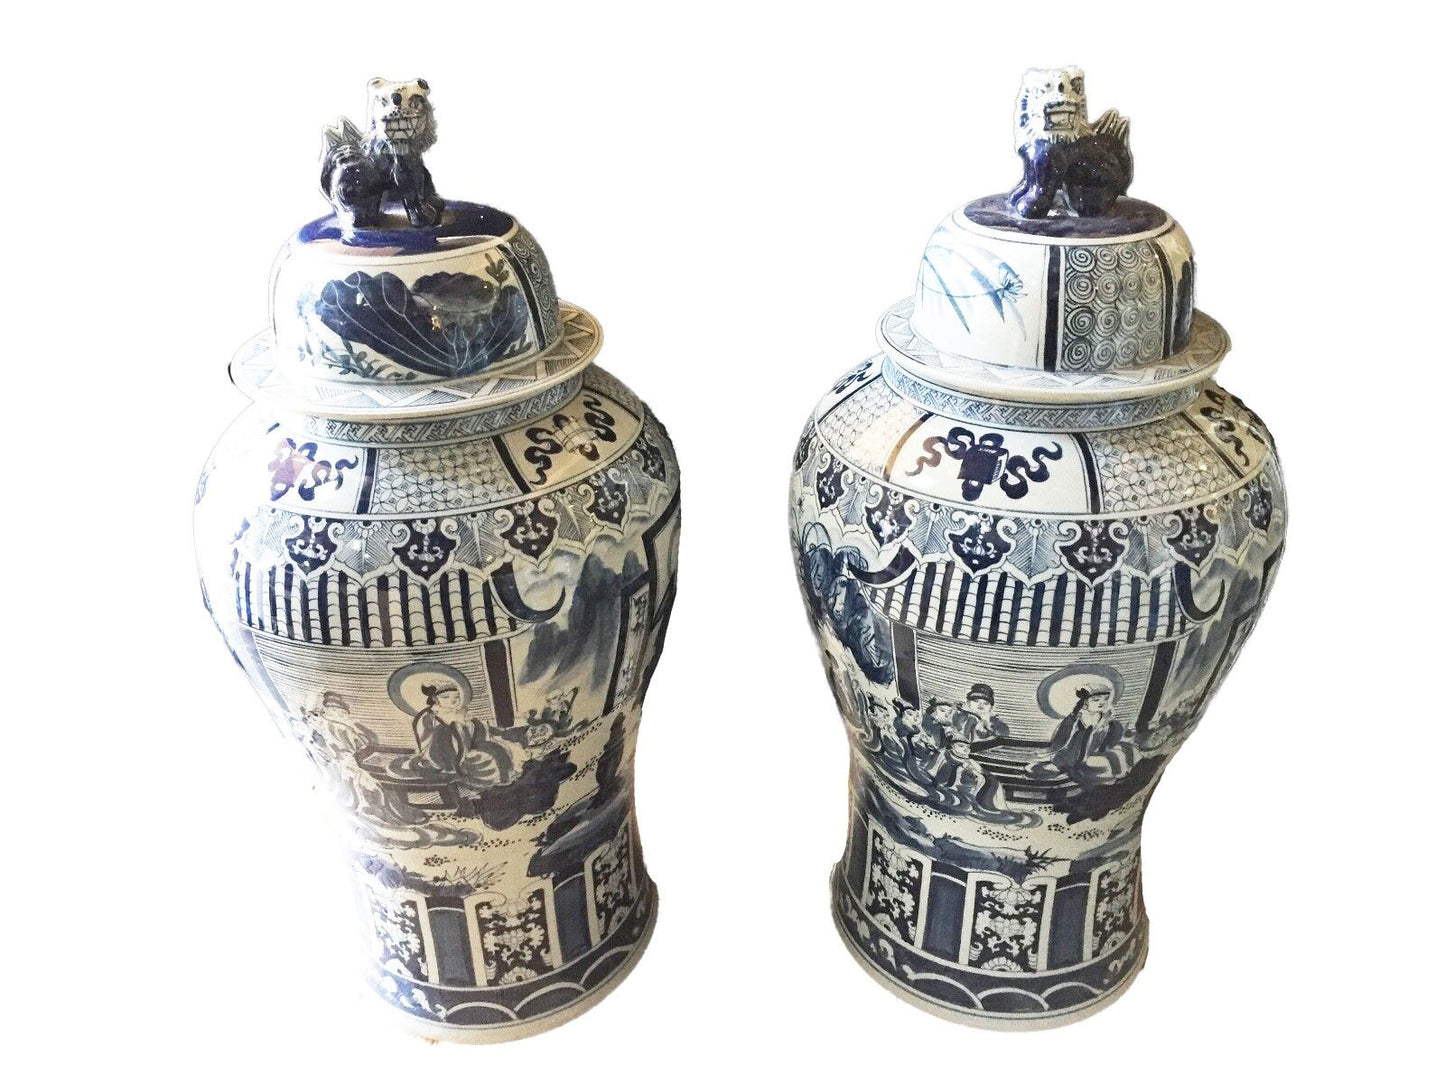 #914 Large Chinoiserie B & W Porcelain Ginger Jars - a Pair 47" H